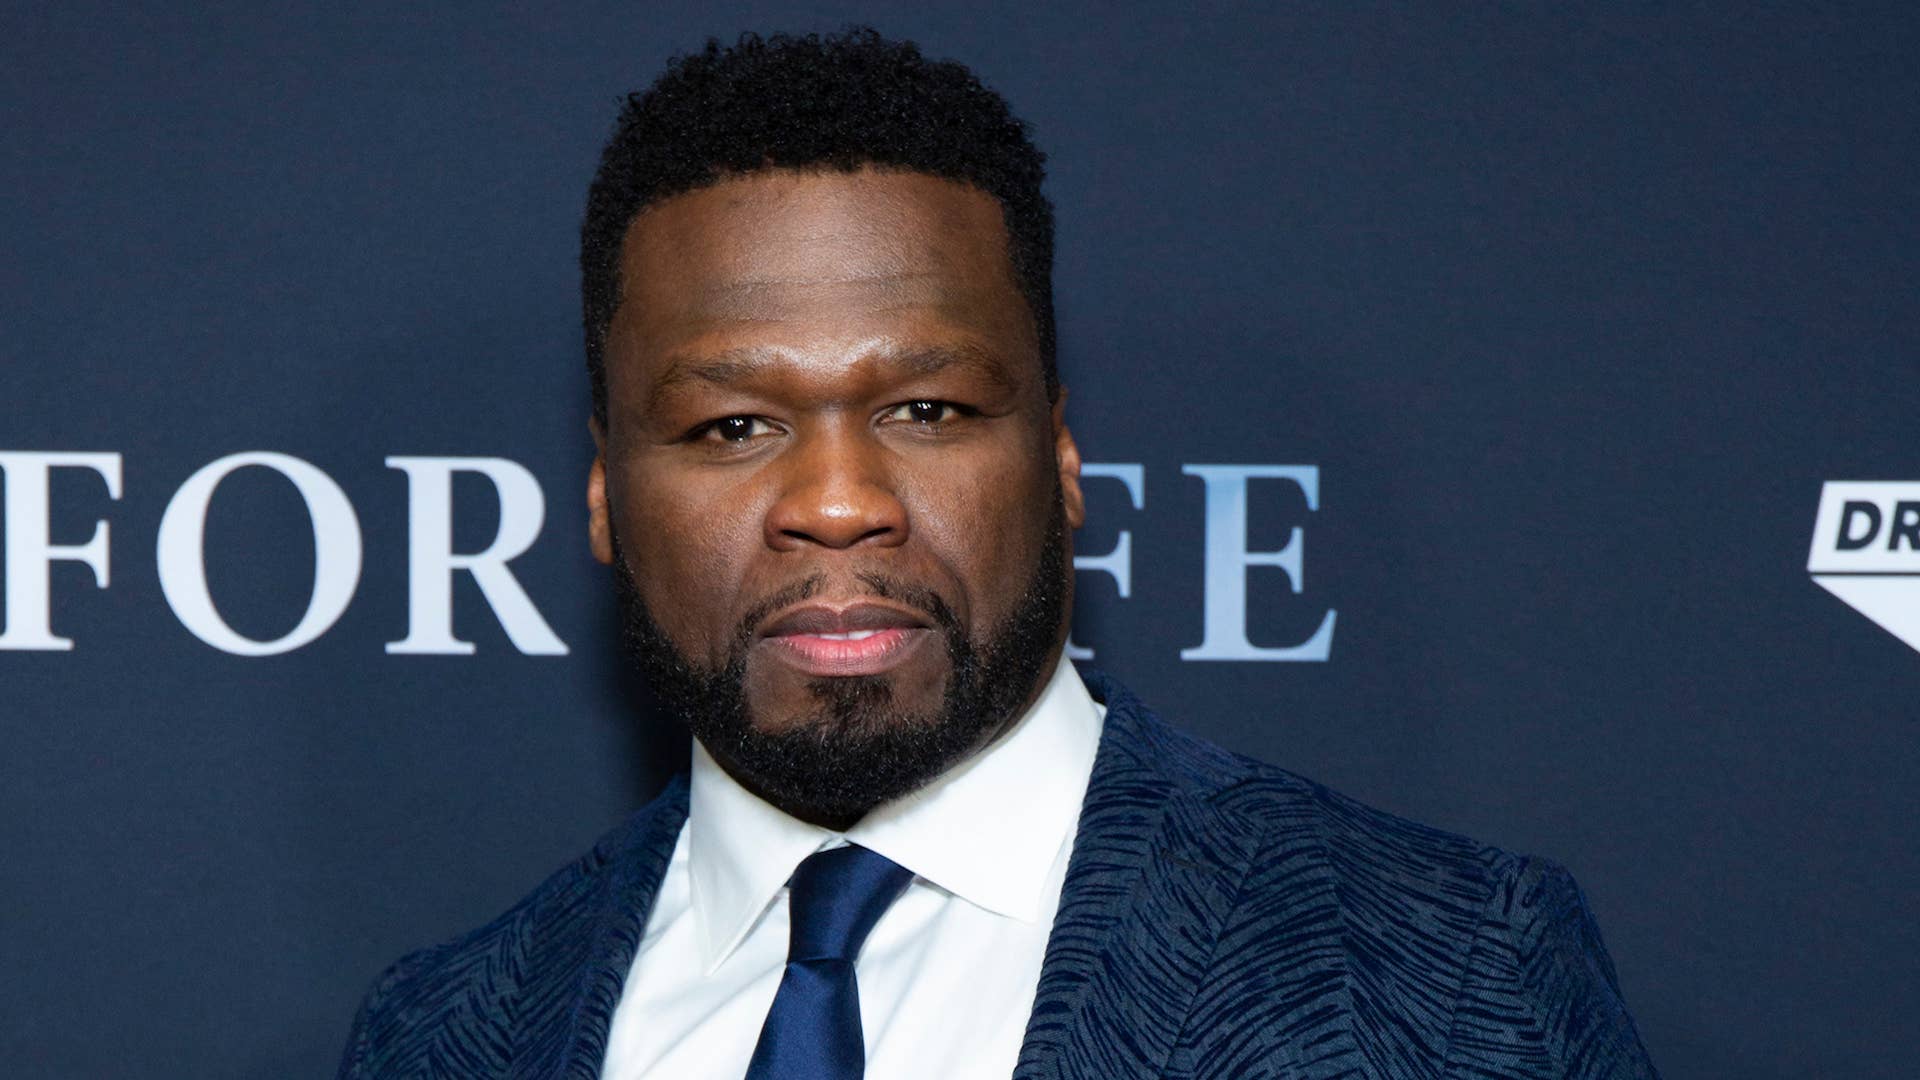 Talent and executive producers from ABC's new drama "For Life" 50 Cent